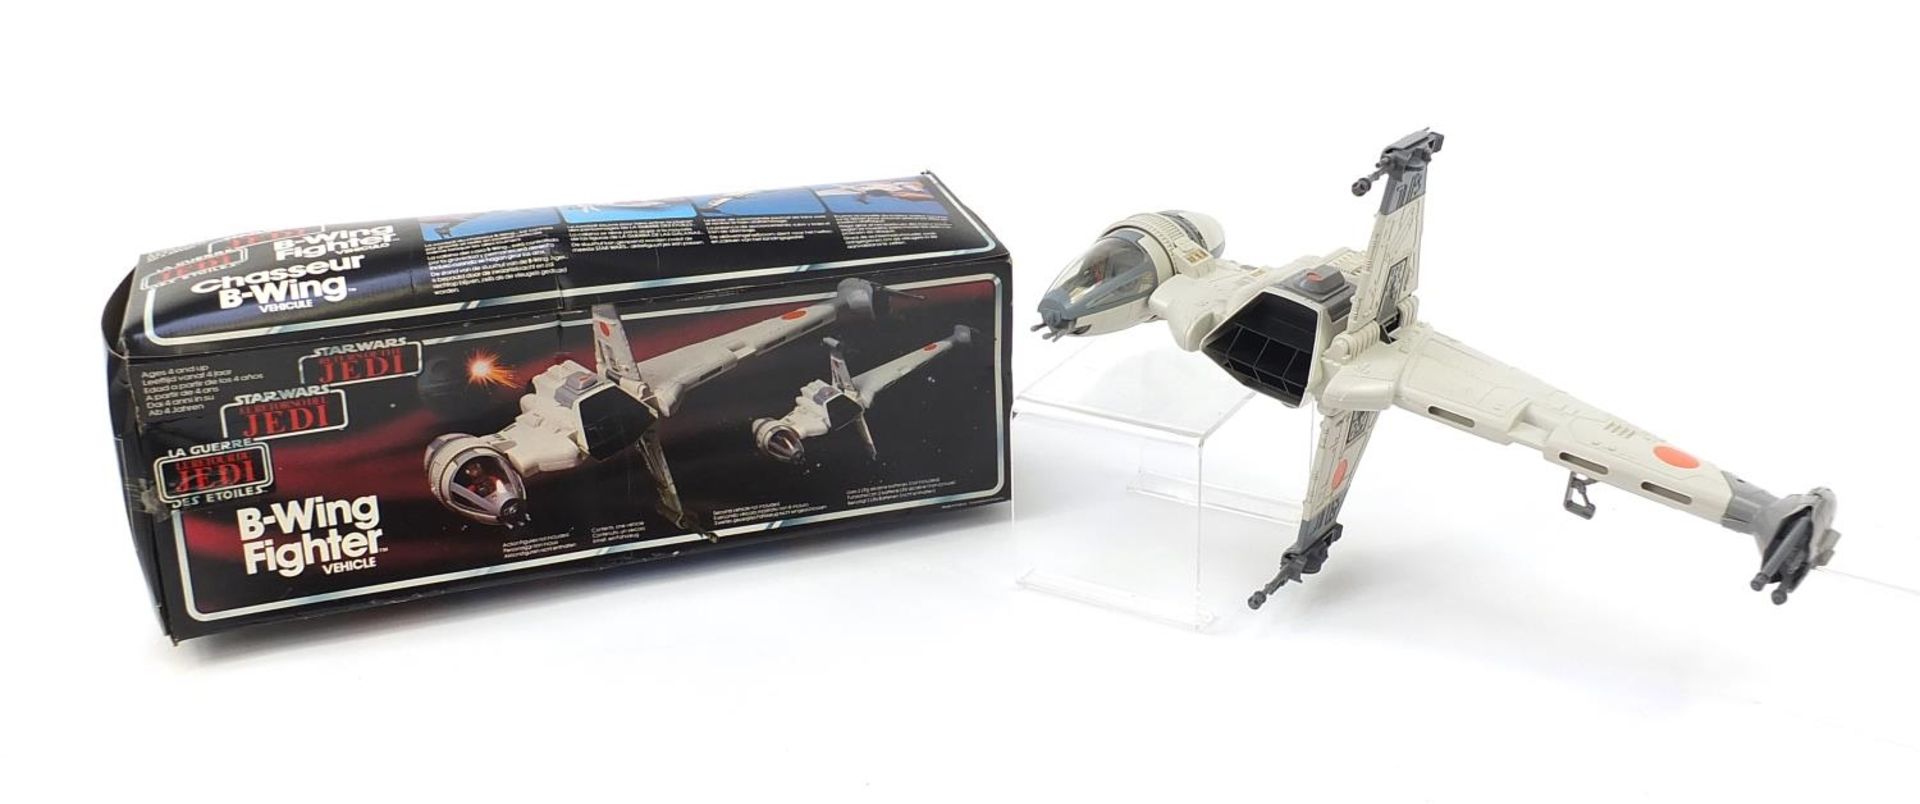 Vintage Star Wars Return of the Jedi B-Wing Fighter vehicle :For Further Condition Reports Please